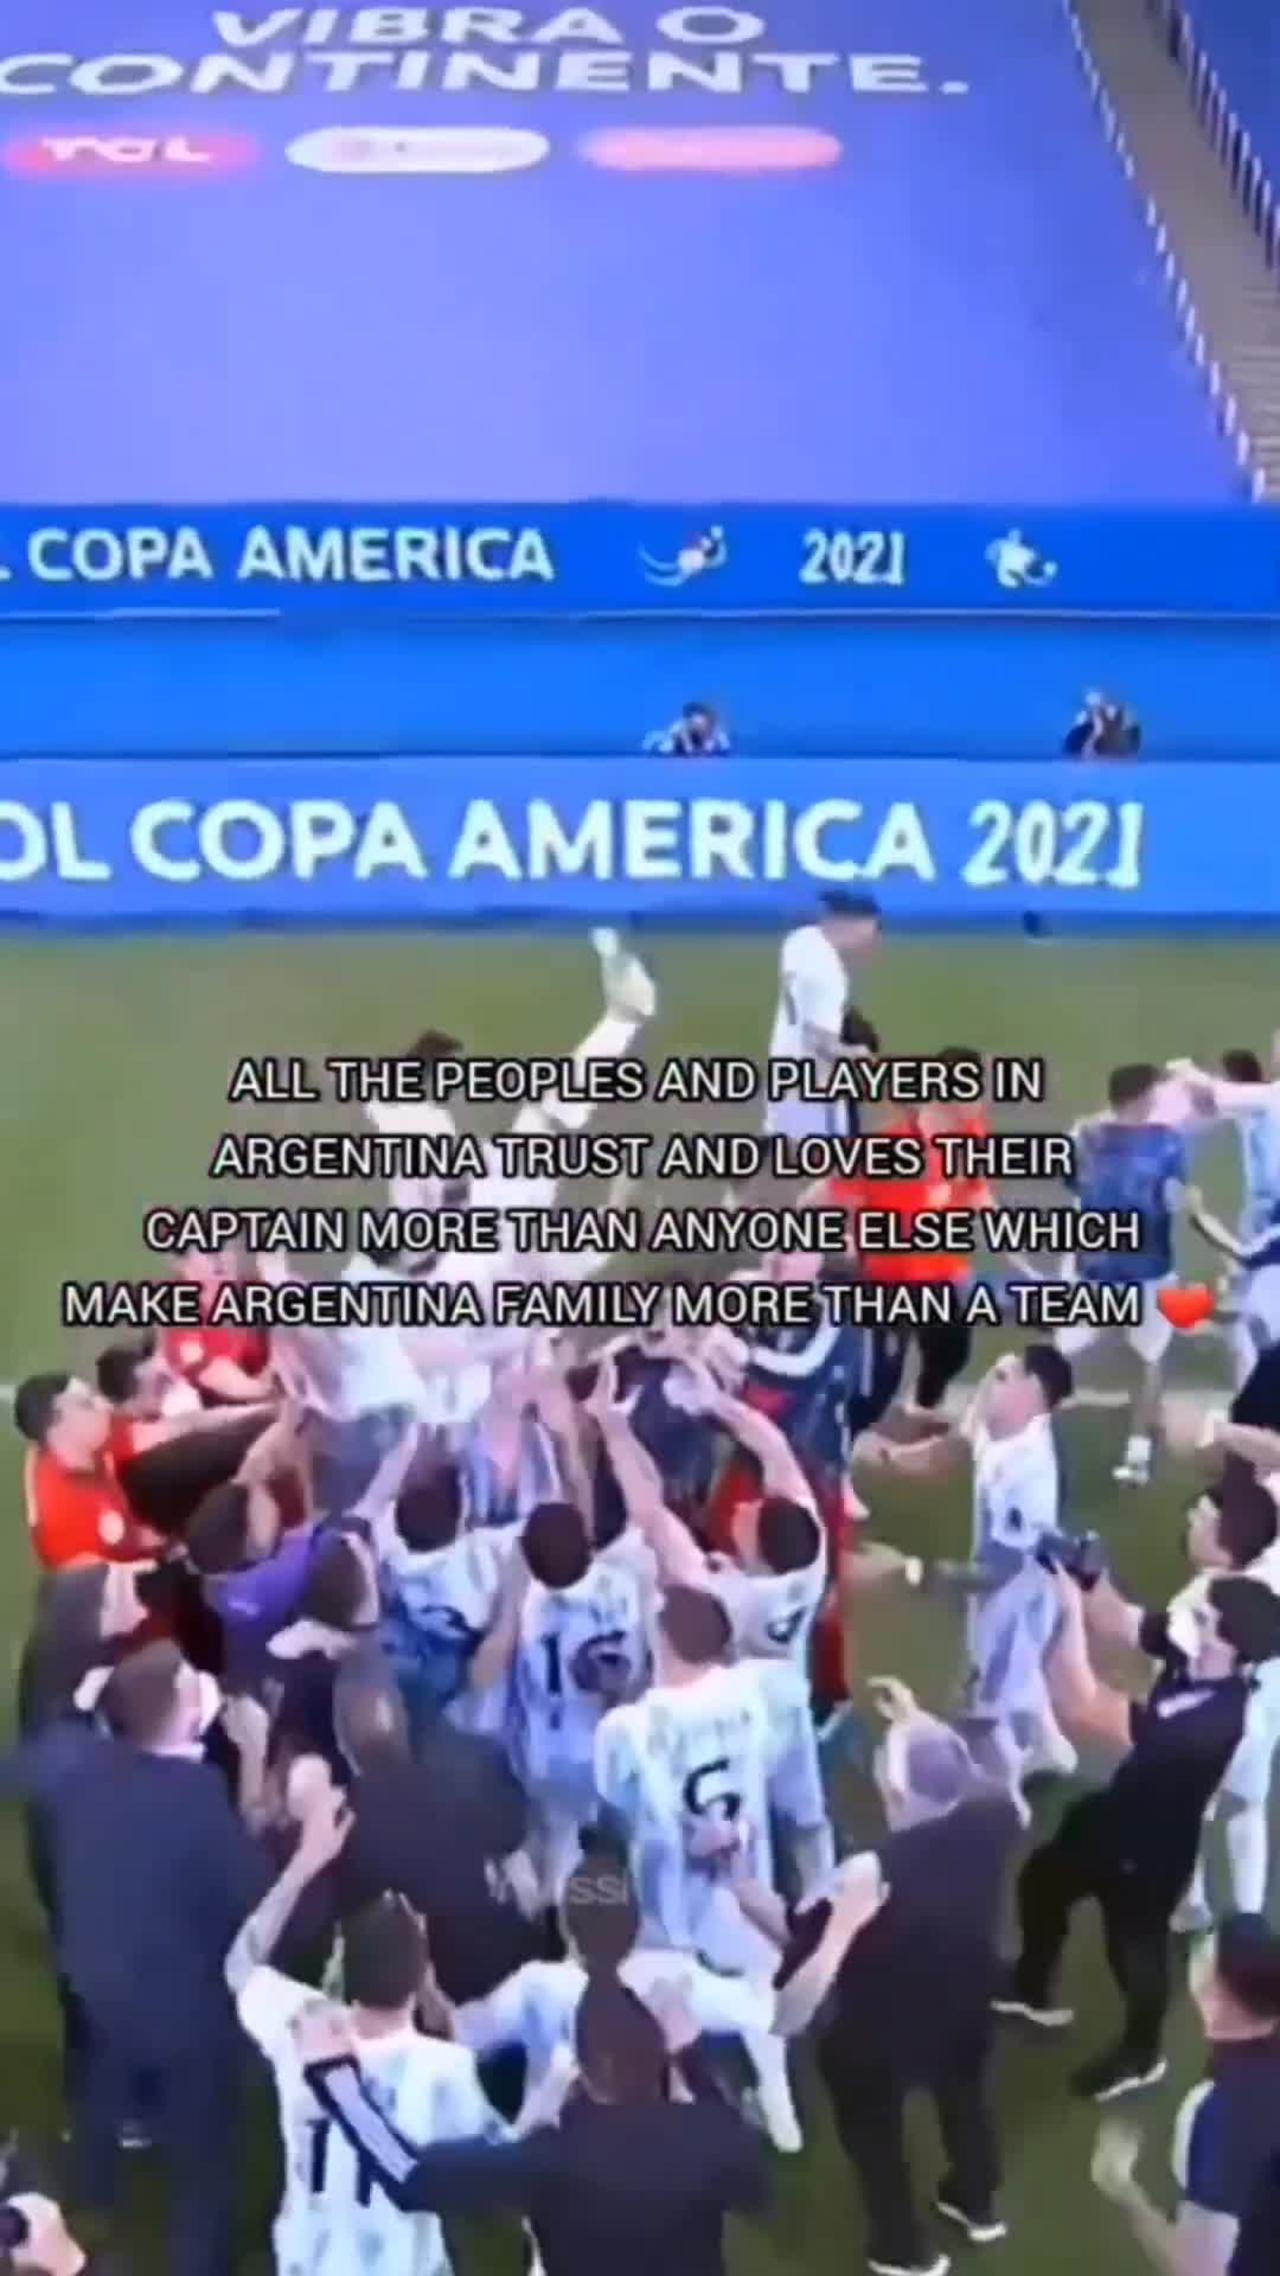 Why Lionel Messi pay for his Copa America 2016 for his whole team